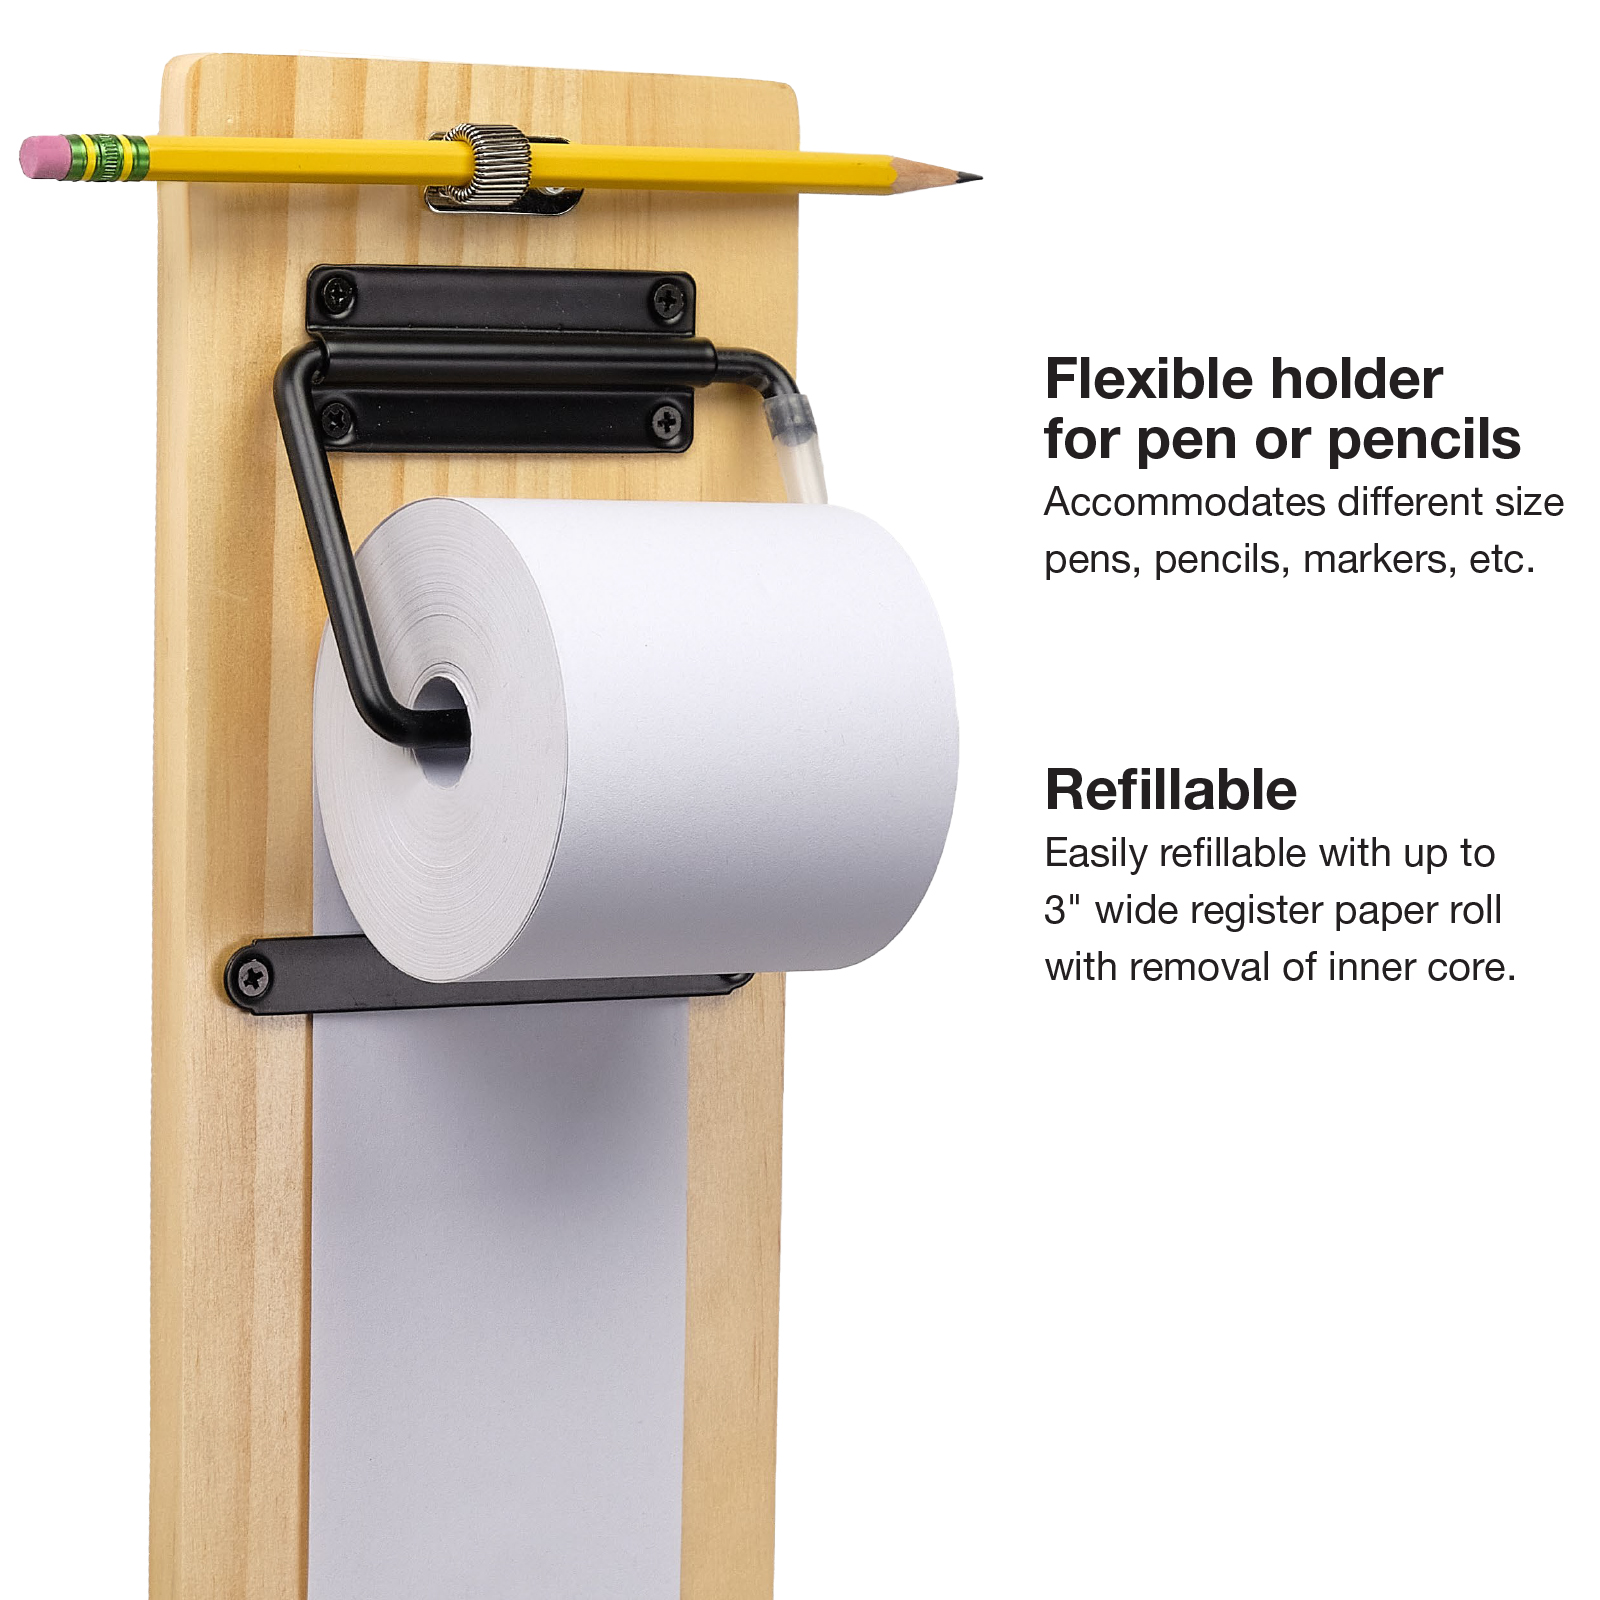 Excello Global Products Wall Mounted Note Paper Dispenser with A 160 Foot Roll of Paper Included (Black)